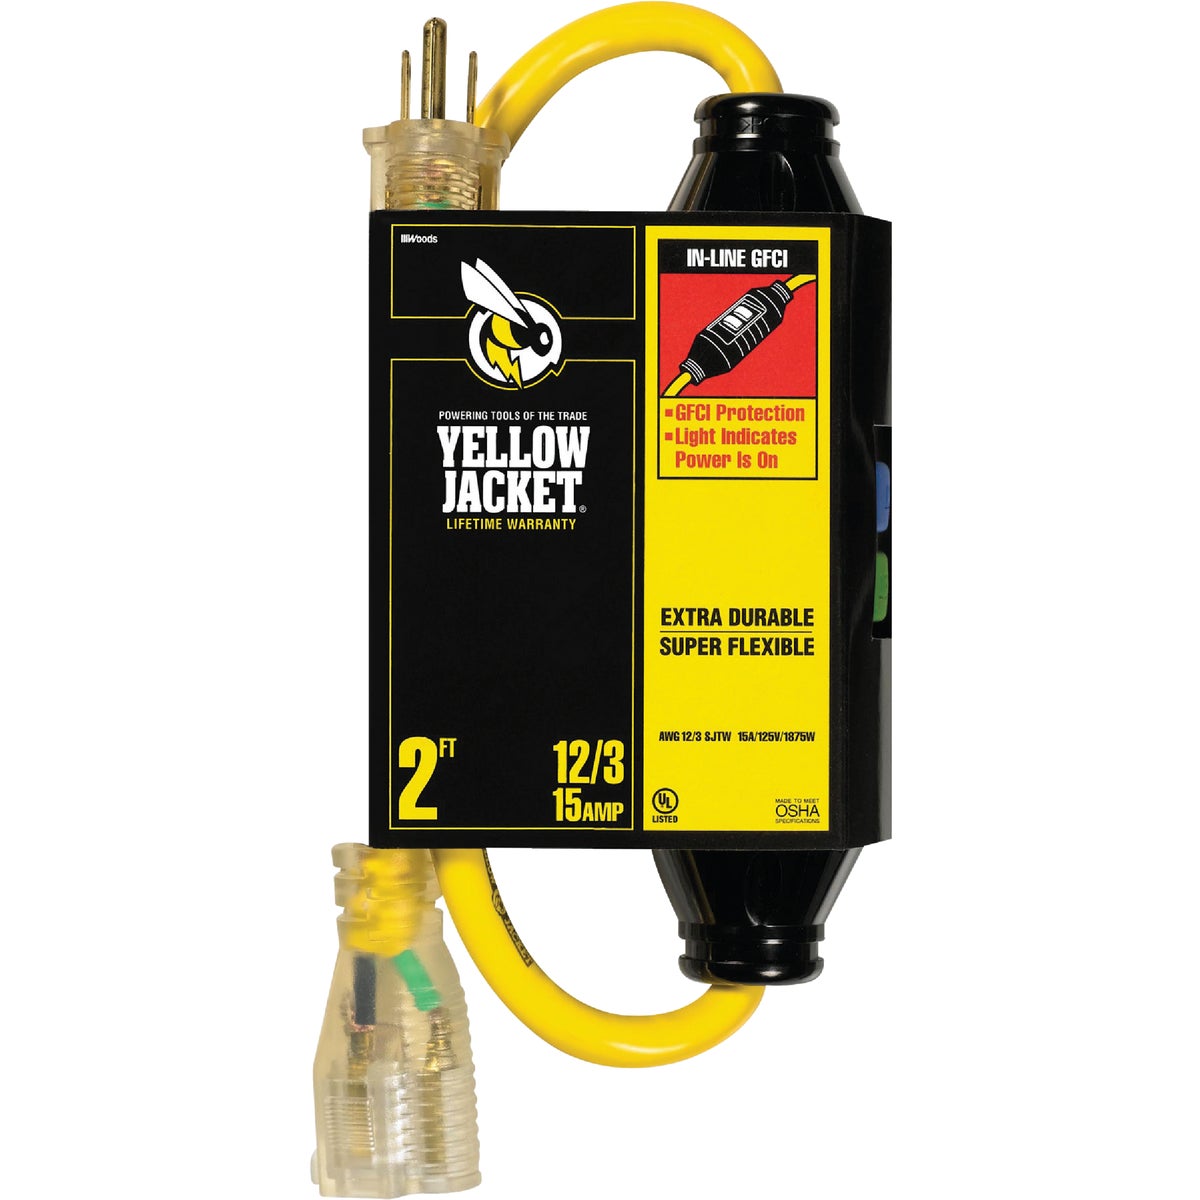 Item 536776, 2 foot Yellow Jacket extremely flexible GFCI (ground fault circuit 